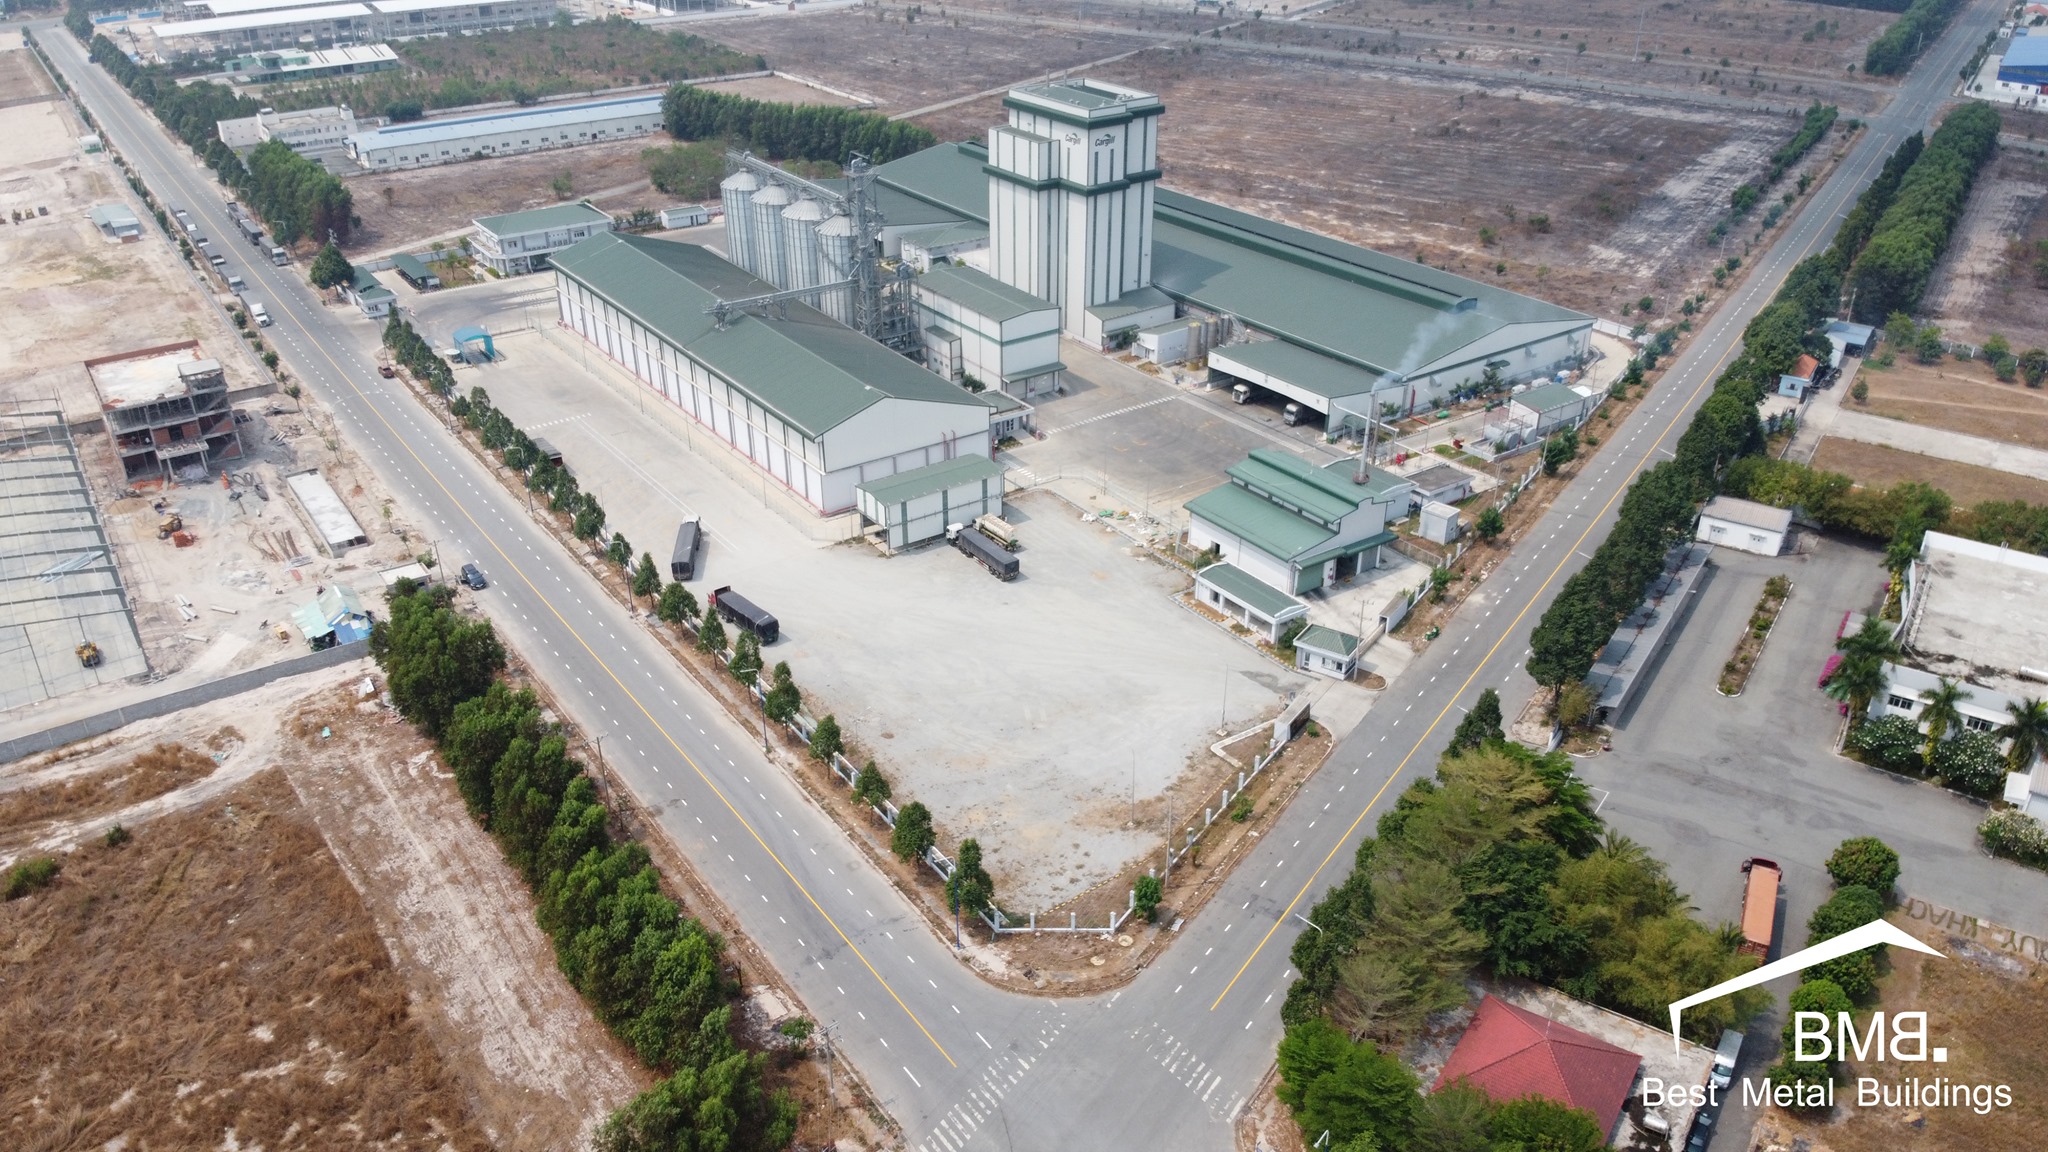 Overview of Cargill Ben Cat Project